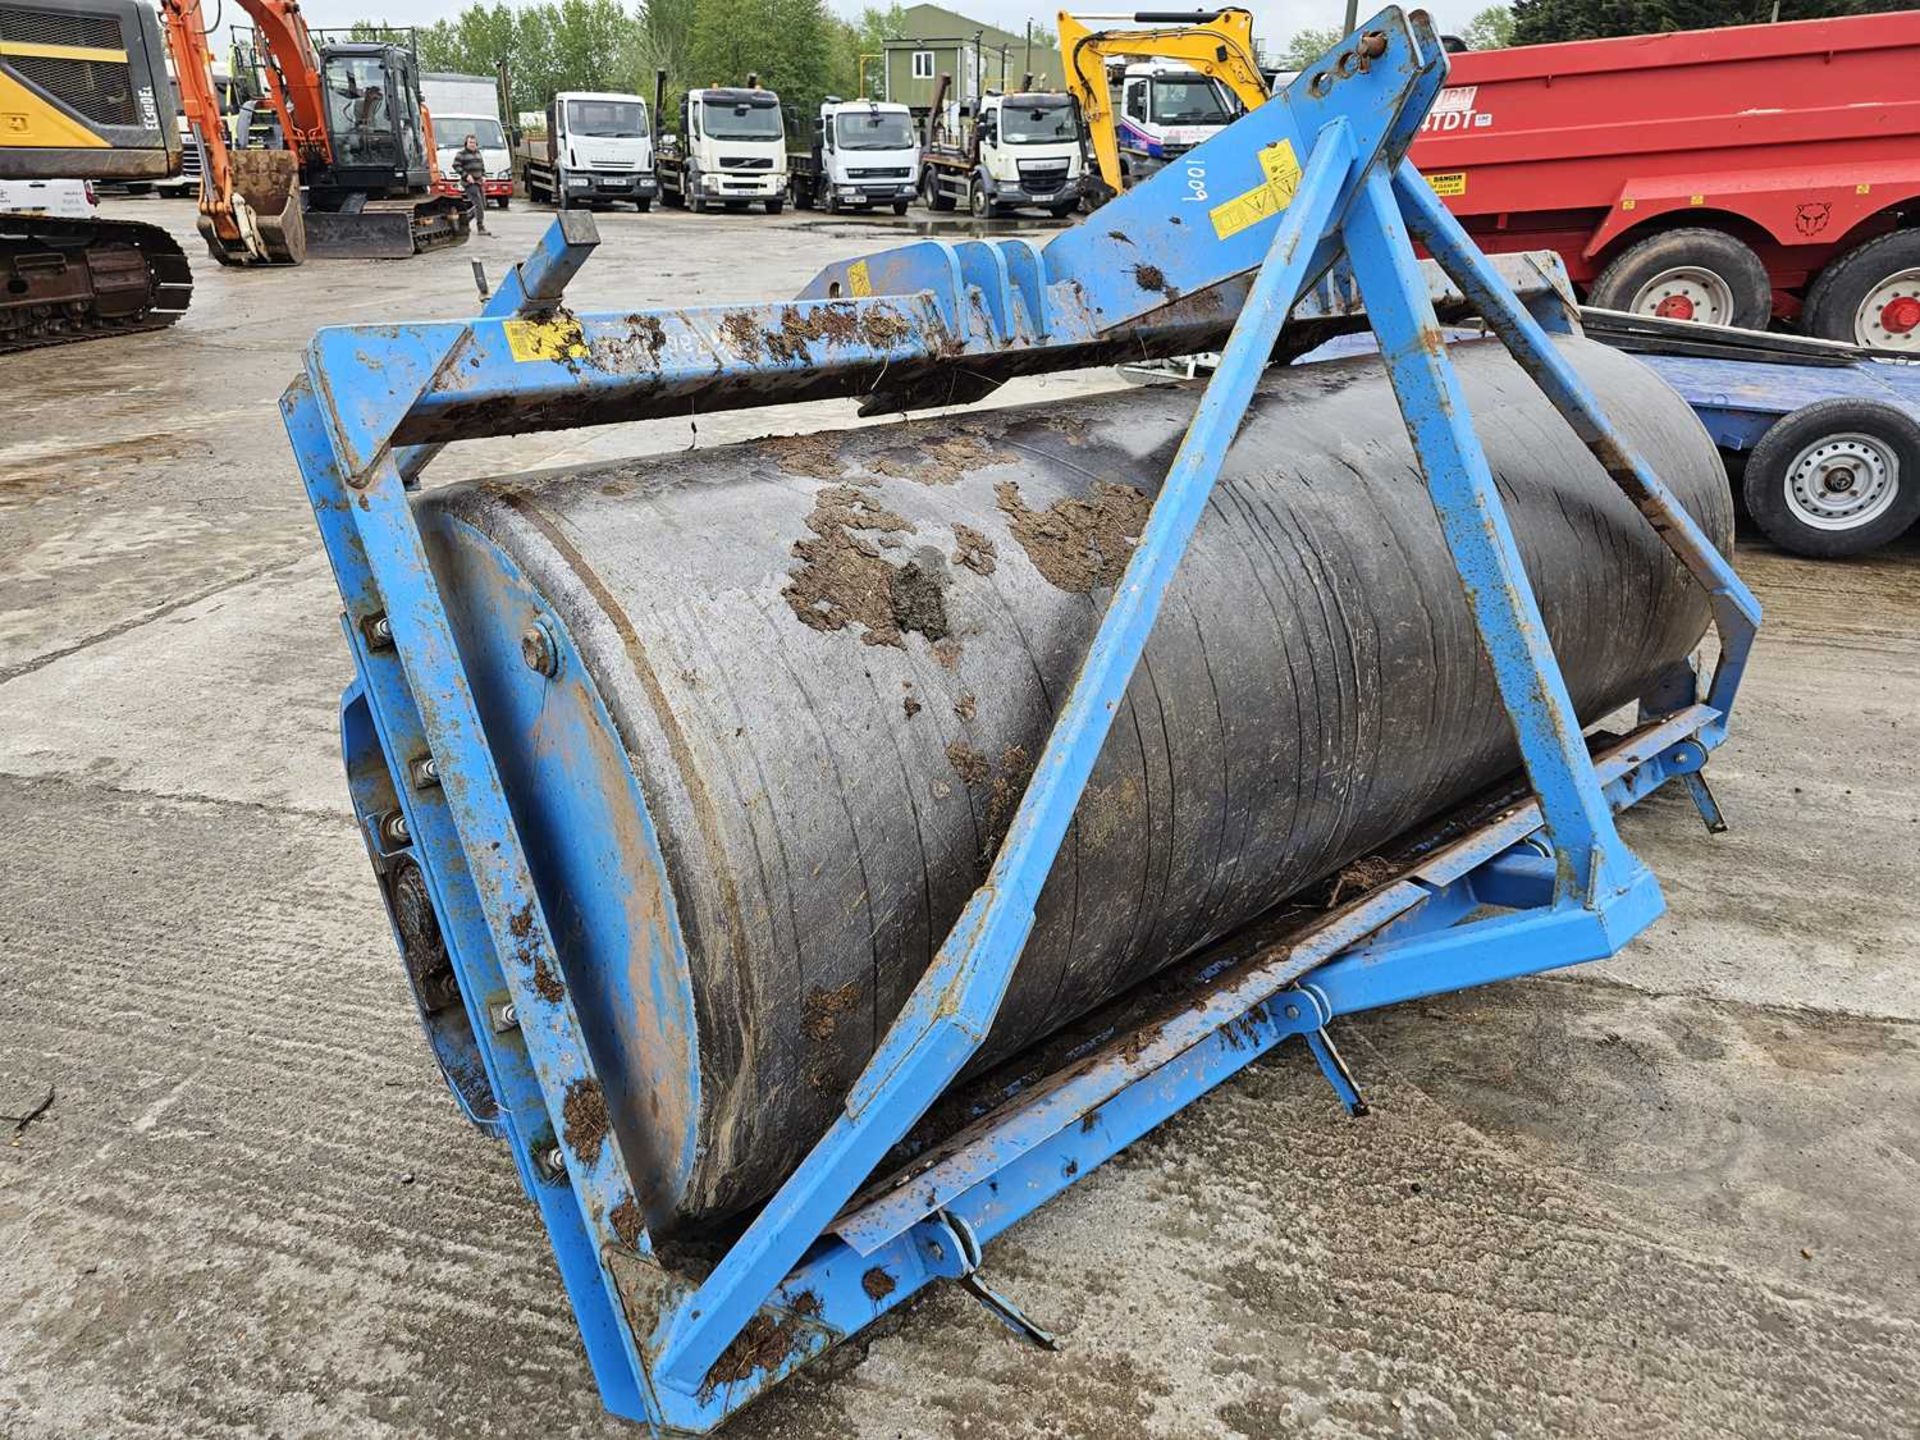 2016 Expom 1200Kg Roller to suit 3 Point Linkage - Image 2 of 9